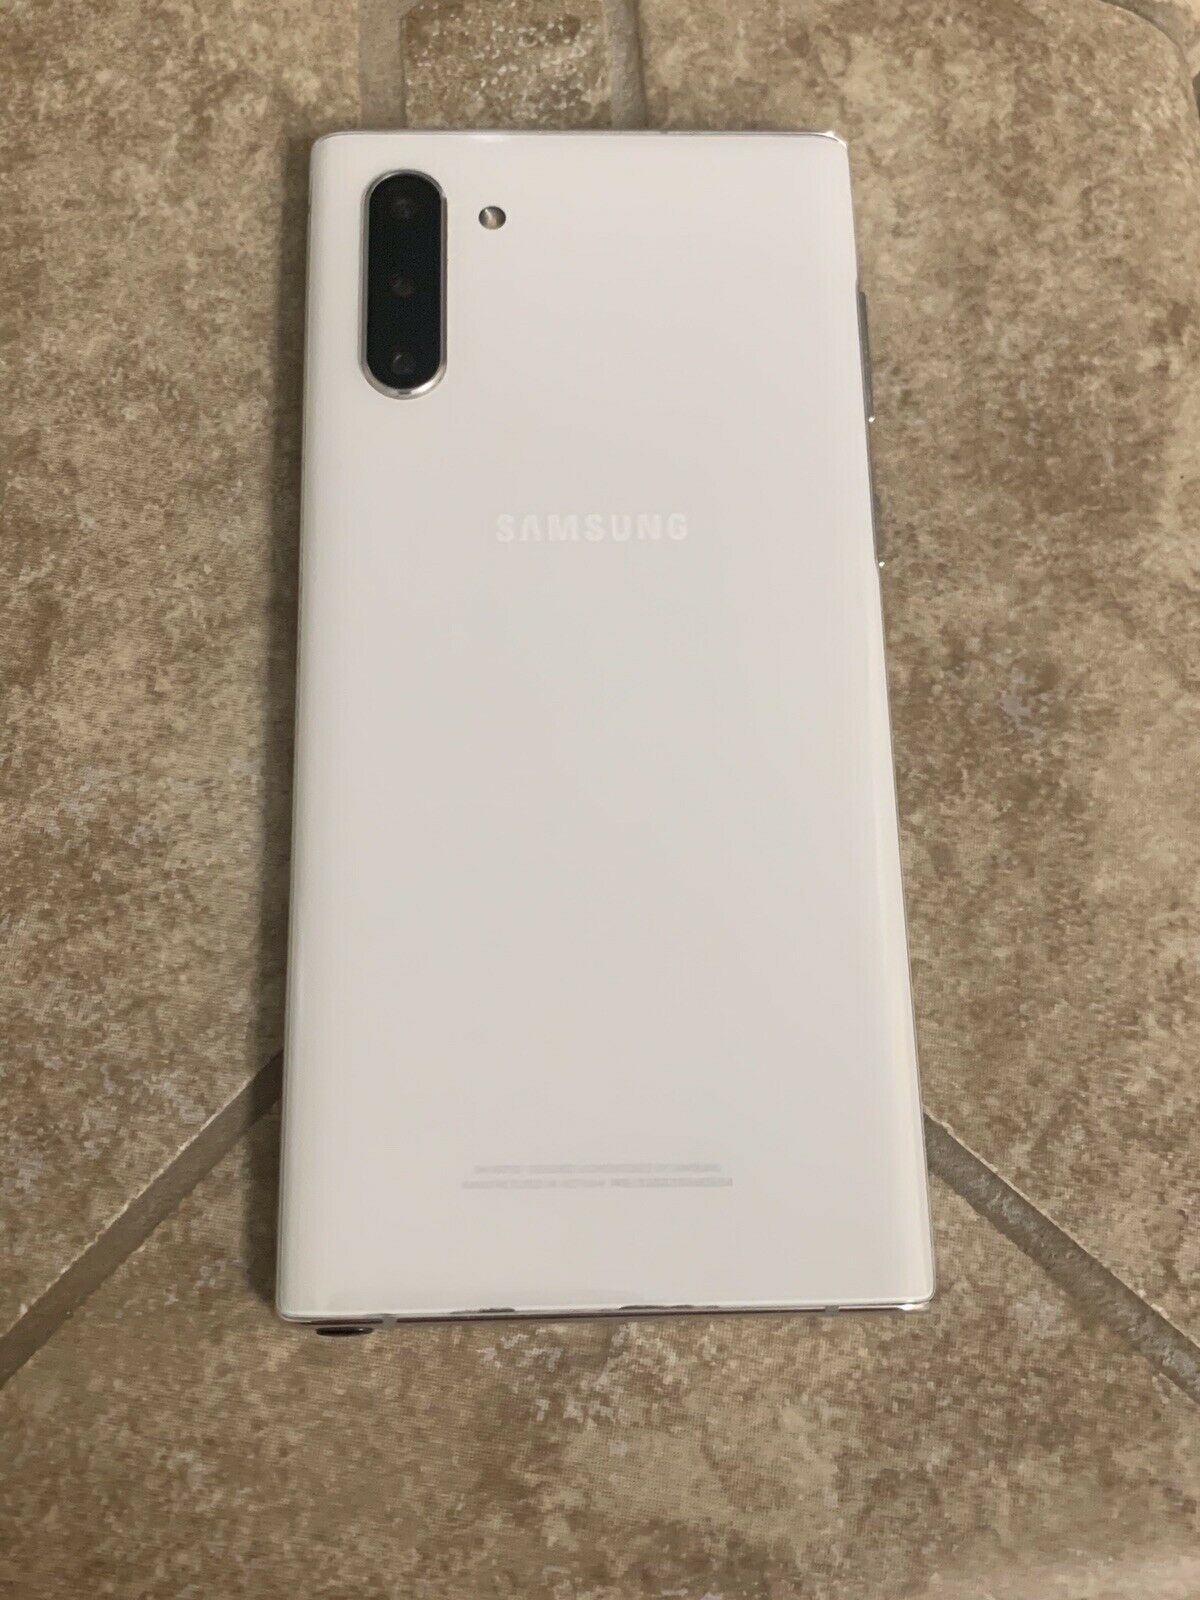 Samsung Galaxy Note 10+ Factory Unlocked Cell Phone with 256 GB